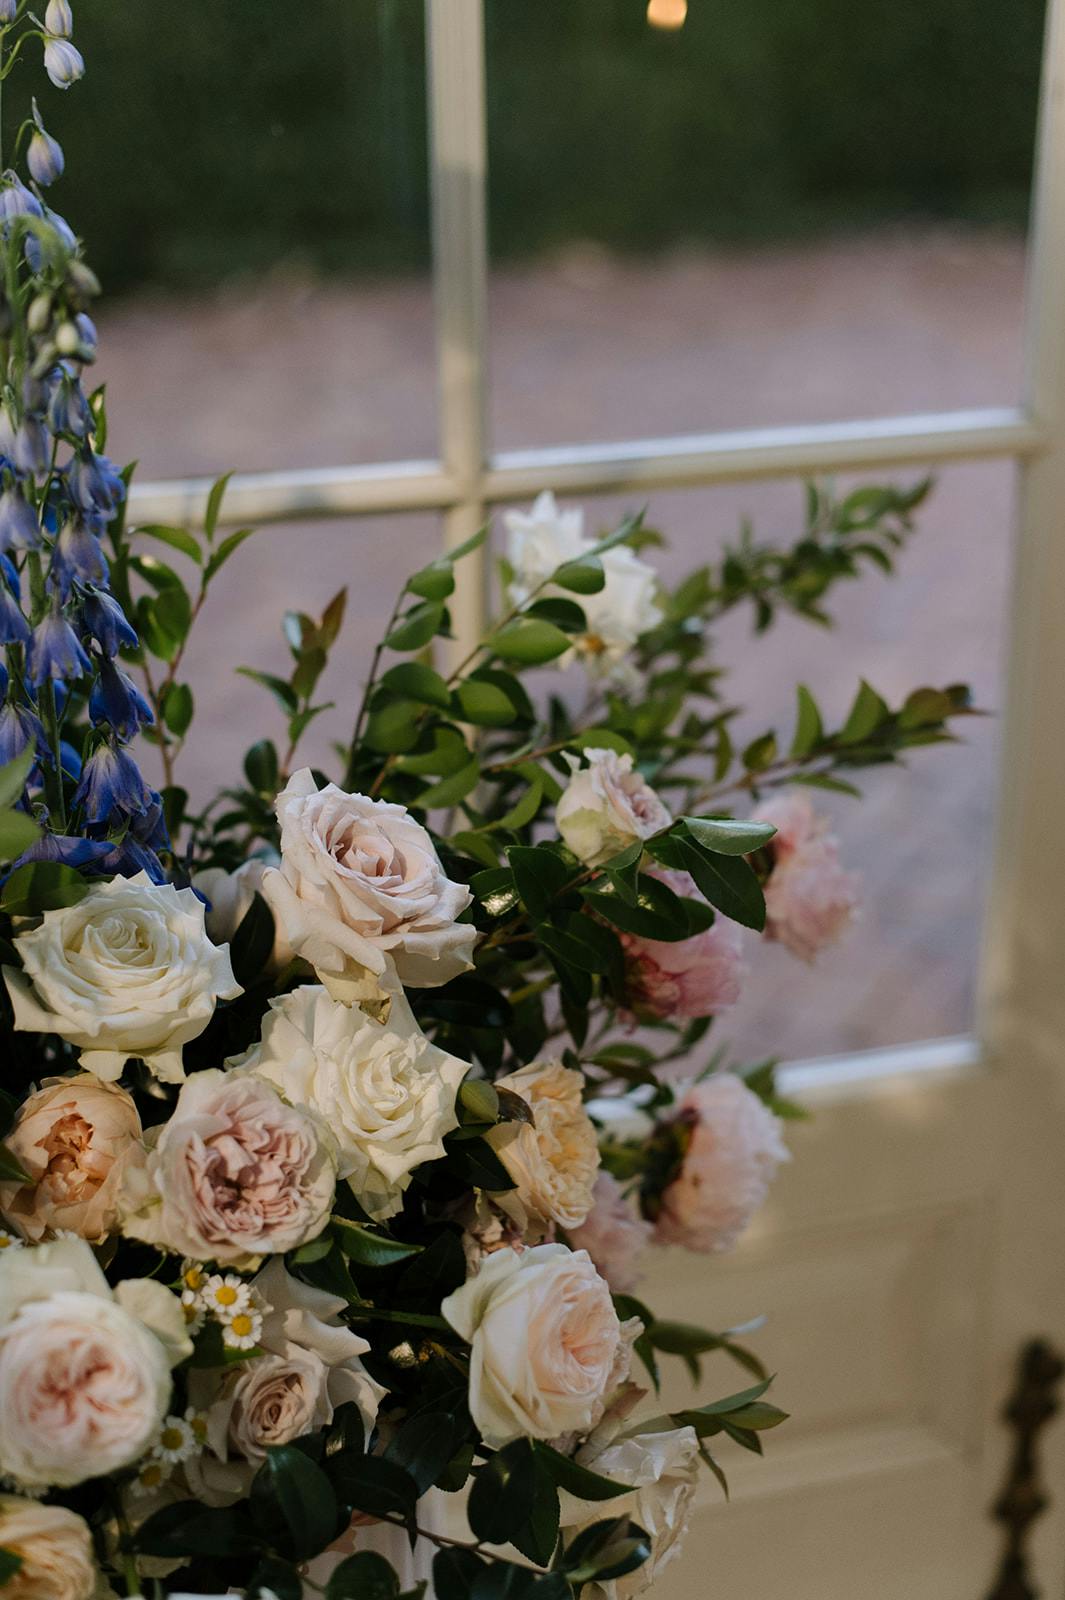 A floral arrangement with pastel roses, peonies, and greenery is positioned in front of a glass door. The soft pink, white, and peach flowers are complemented by green leaves and a few tall, blue flowers, with a brick patio visible outside through the glass.